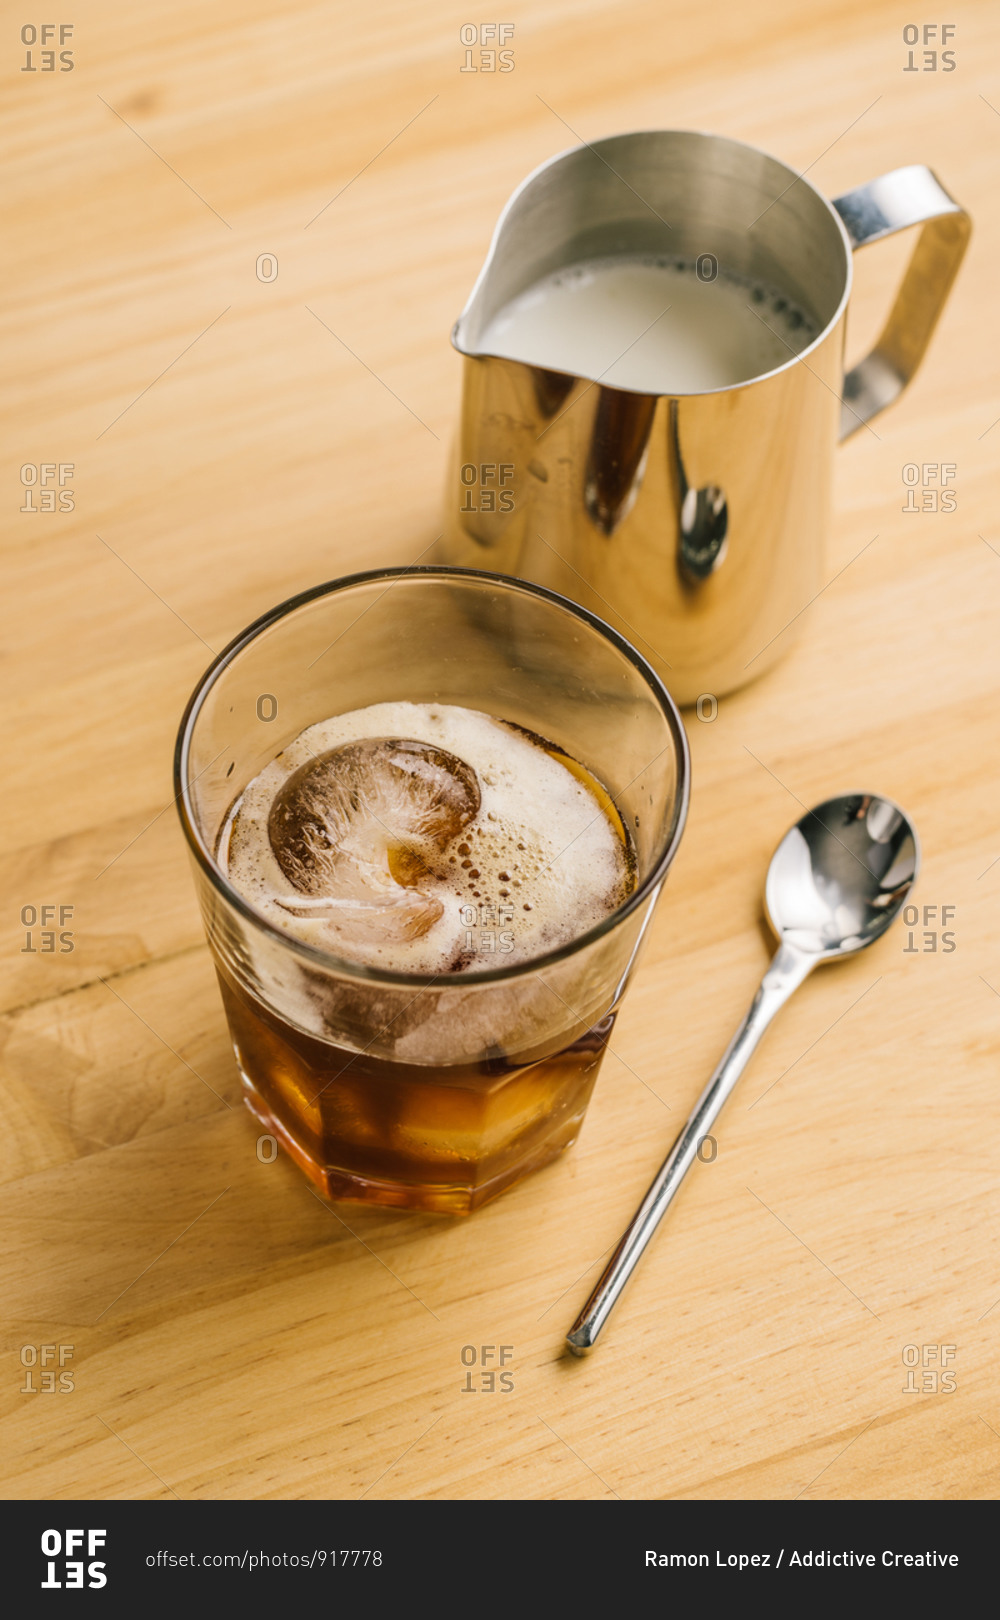 From above of stylish glass with ice black coffee on wooden table with milk pitcher and spoon